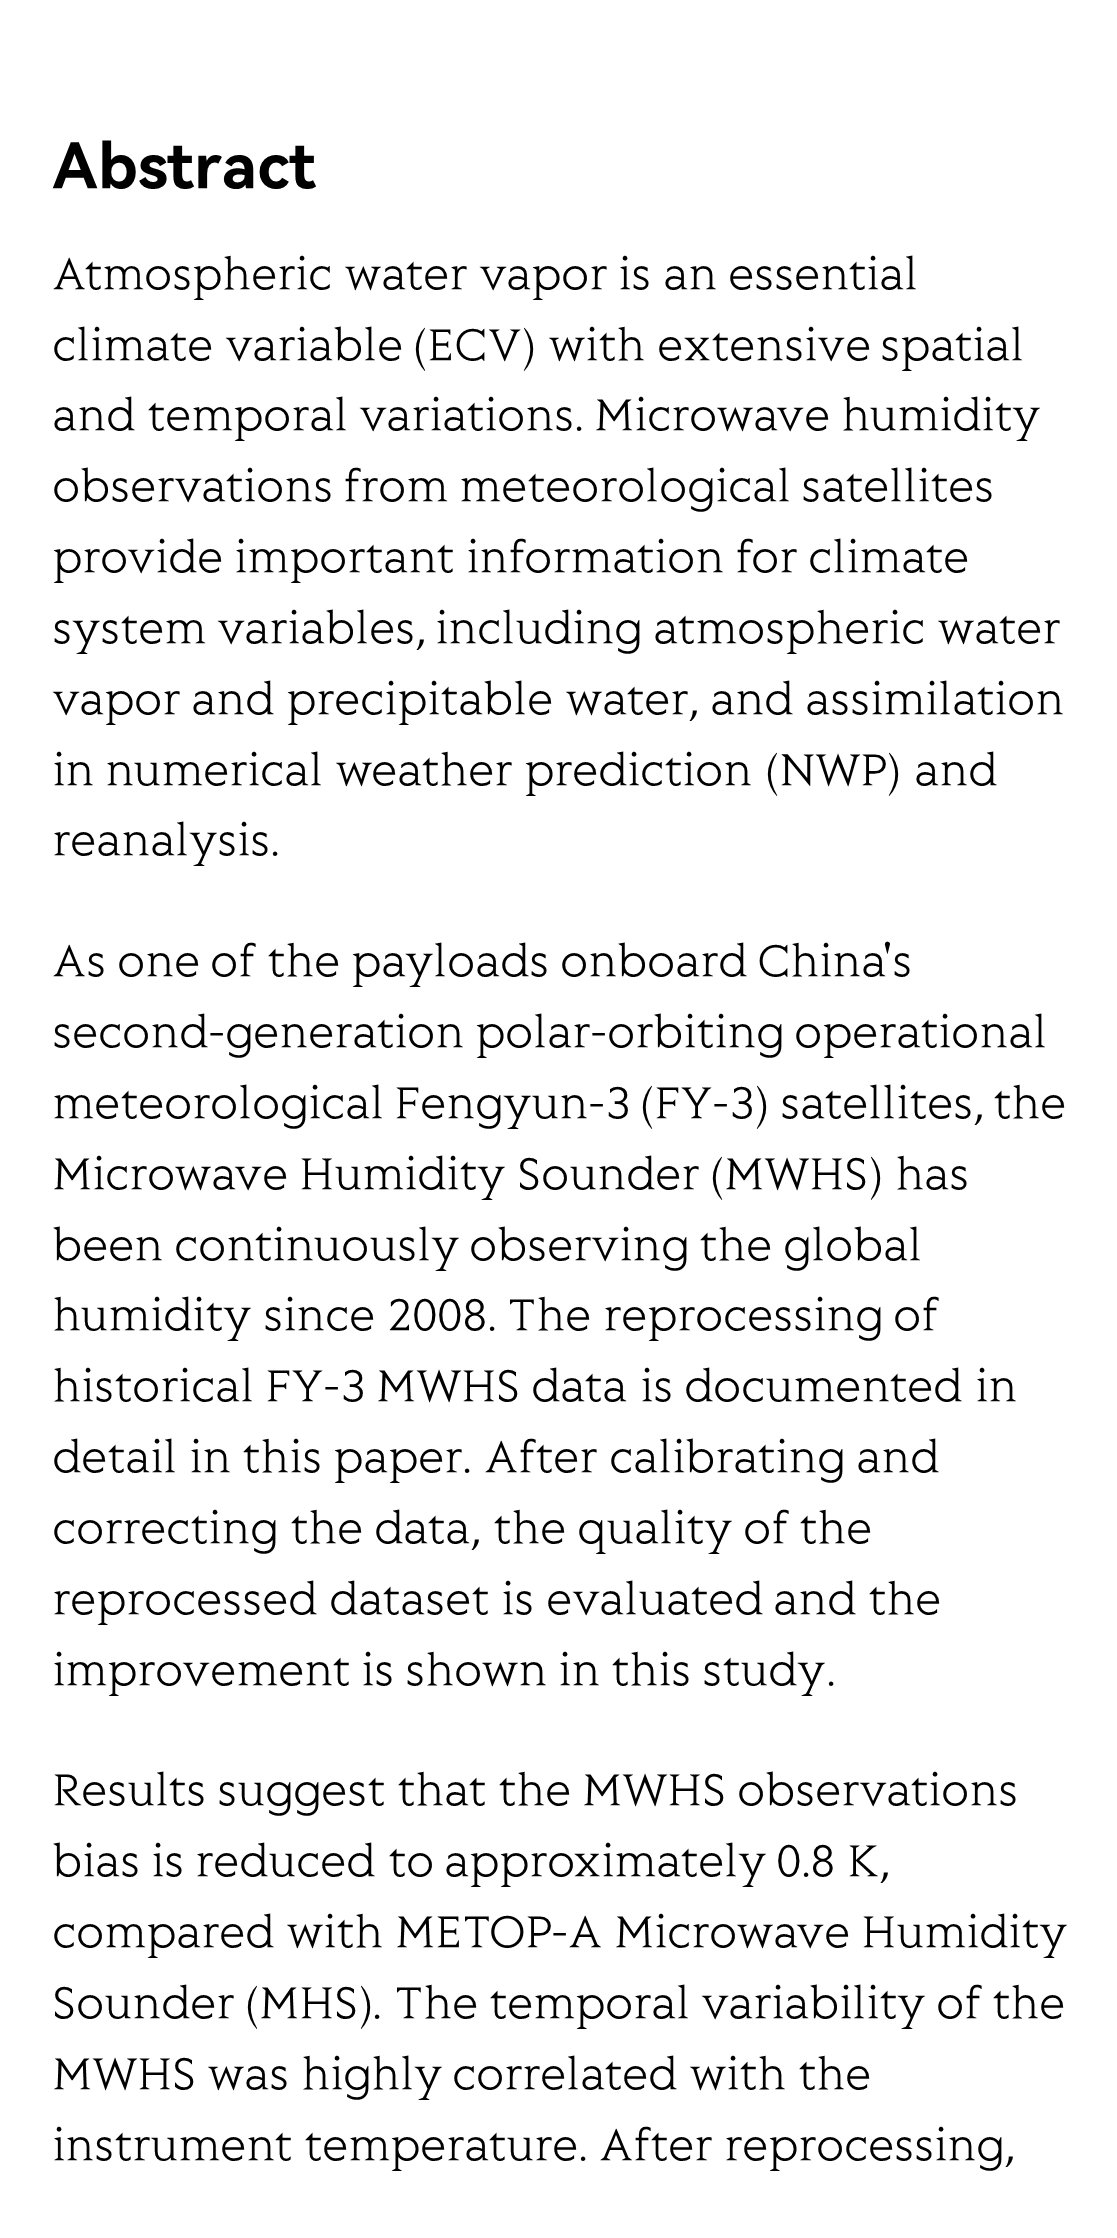 Reprocessing Twelve-Years of Fengyun-3 Microwave Humidity Sounder Historical Data_2